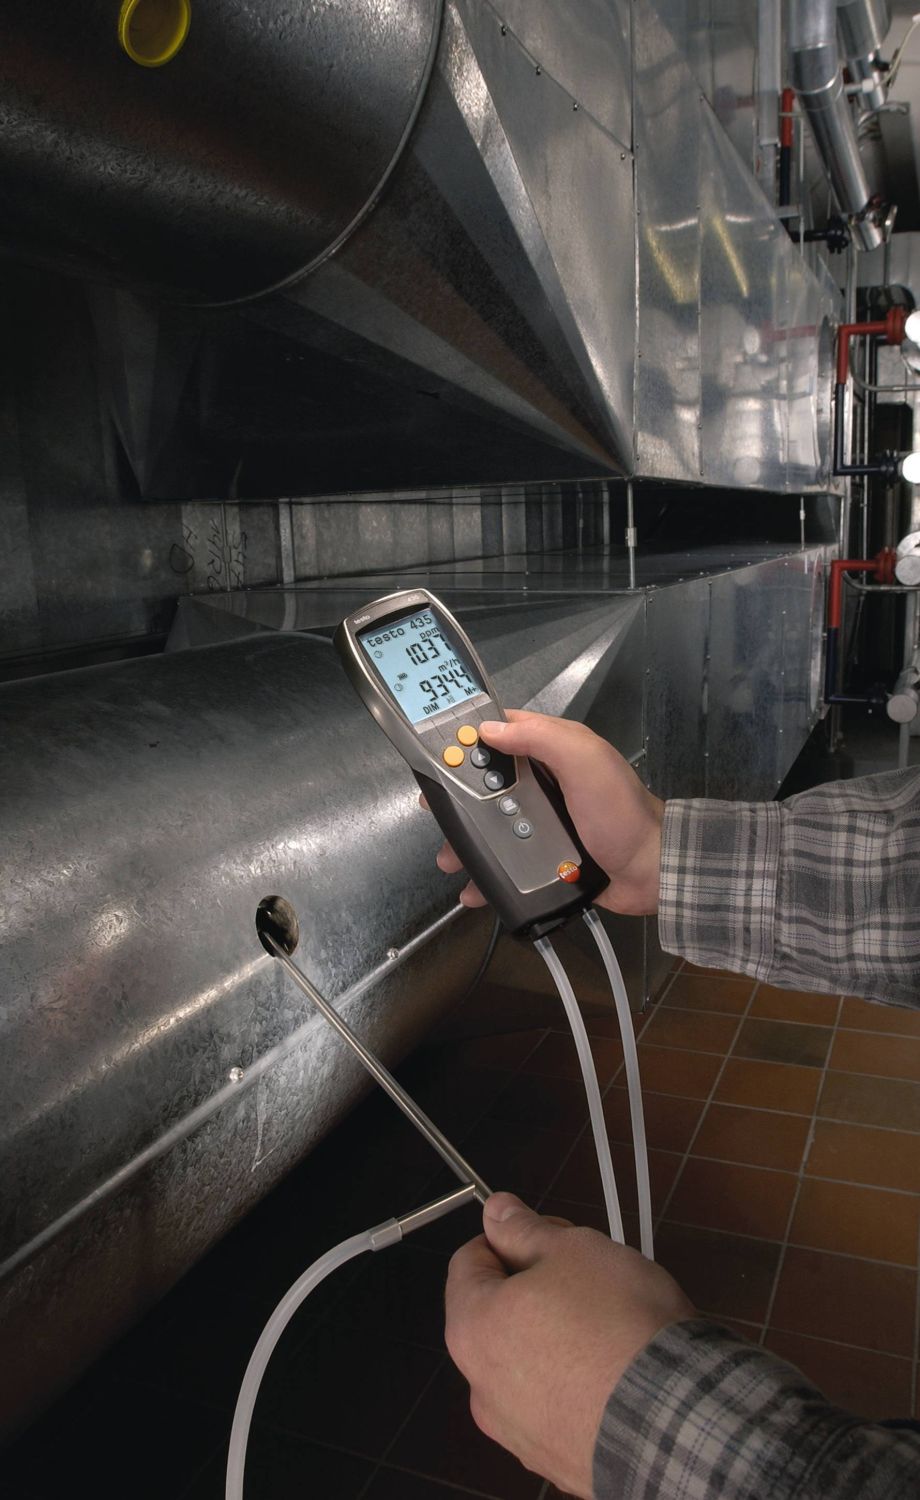 Measurement in the ventilation duct using a pitot tube